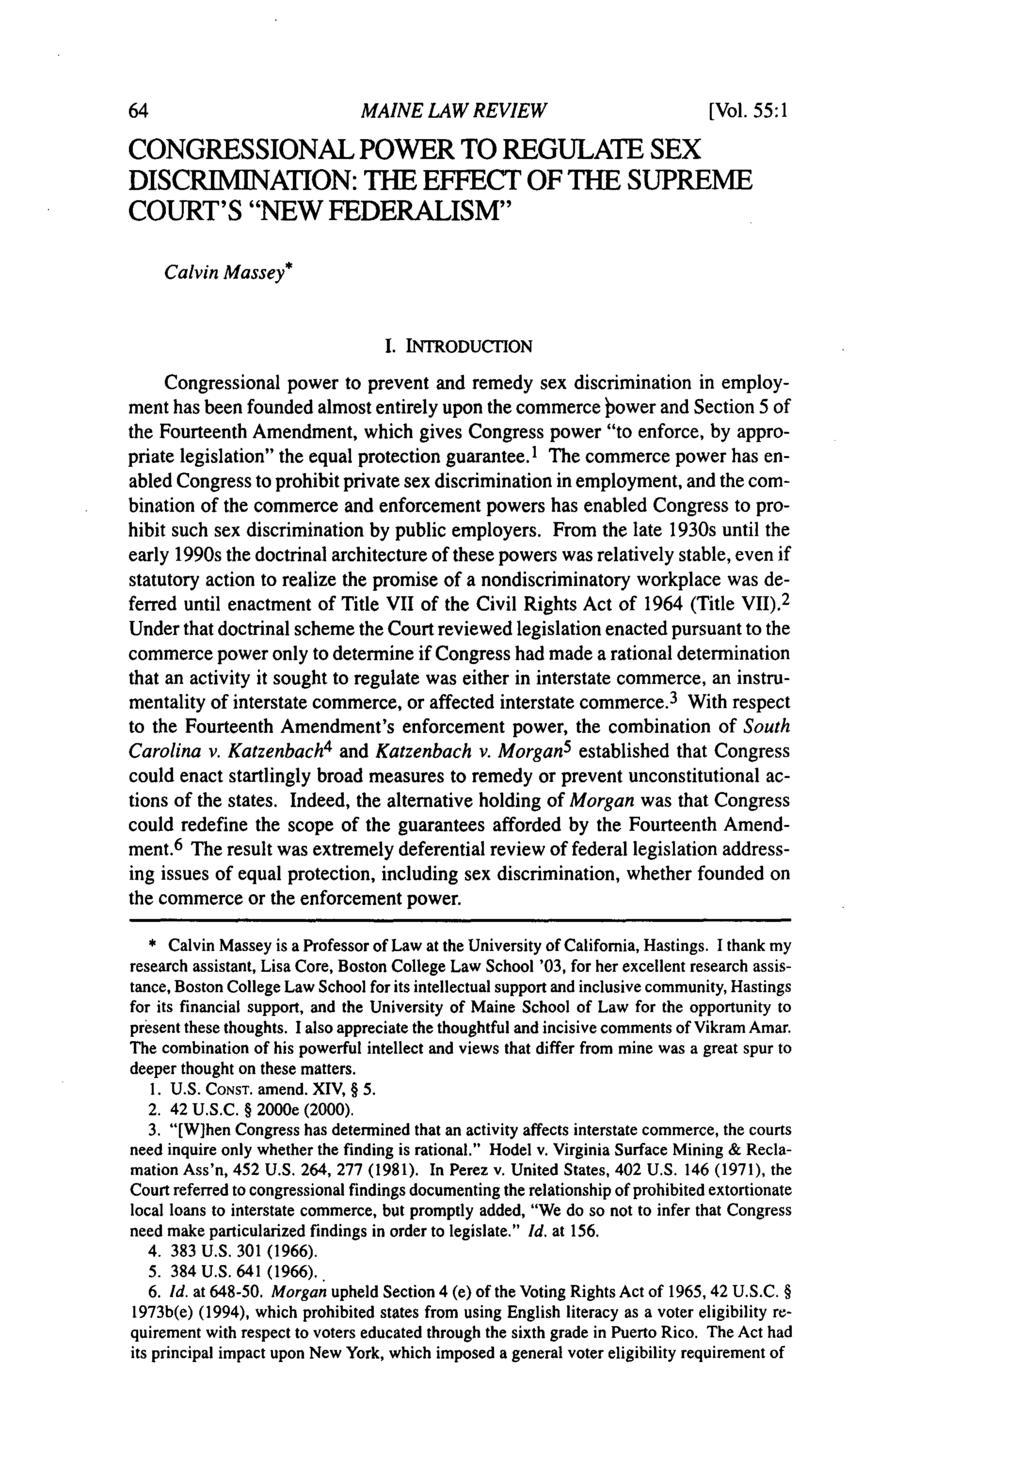 Maine Law Review, Vol. 55, No. 1 [2003], Art. 5 MAINE LAW REVIEW CONGRESSIONAL POWER TO REGULATE SEX DISCRIMINATION: THE EFFECT OF THE SUPREME COURT'S "NEW FEDERALISM" Calvin Massey* [Vol. 55:1 I.